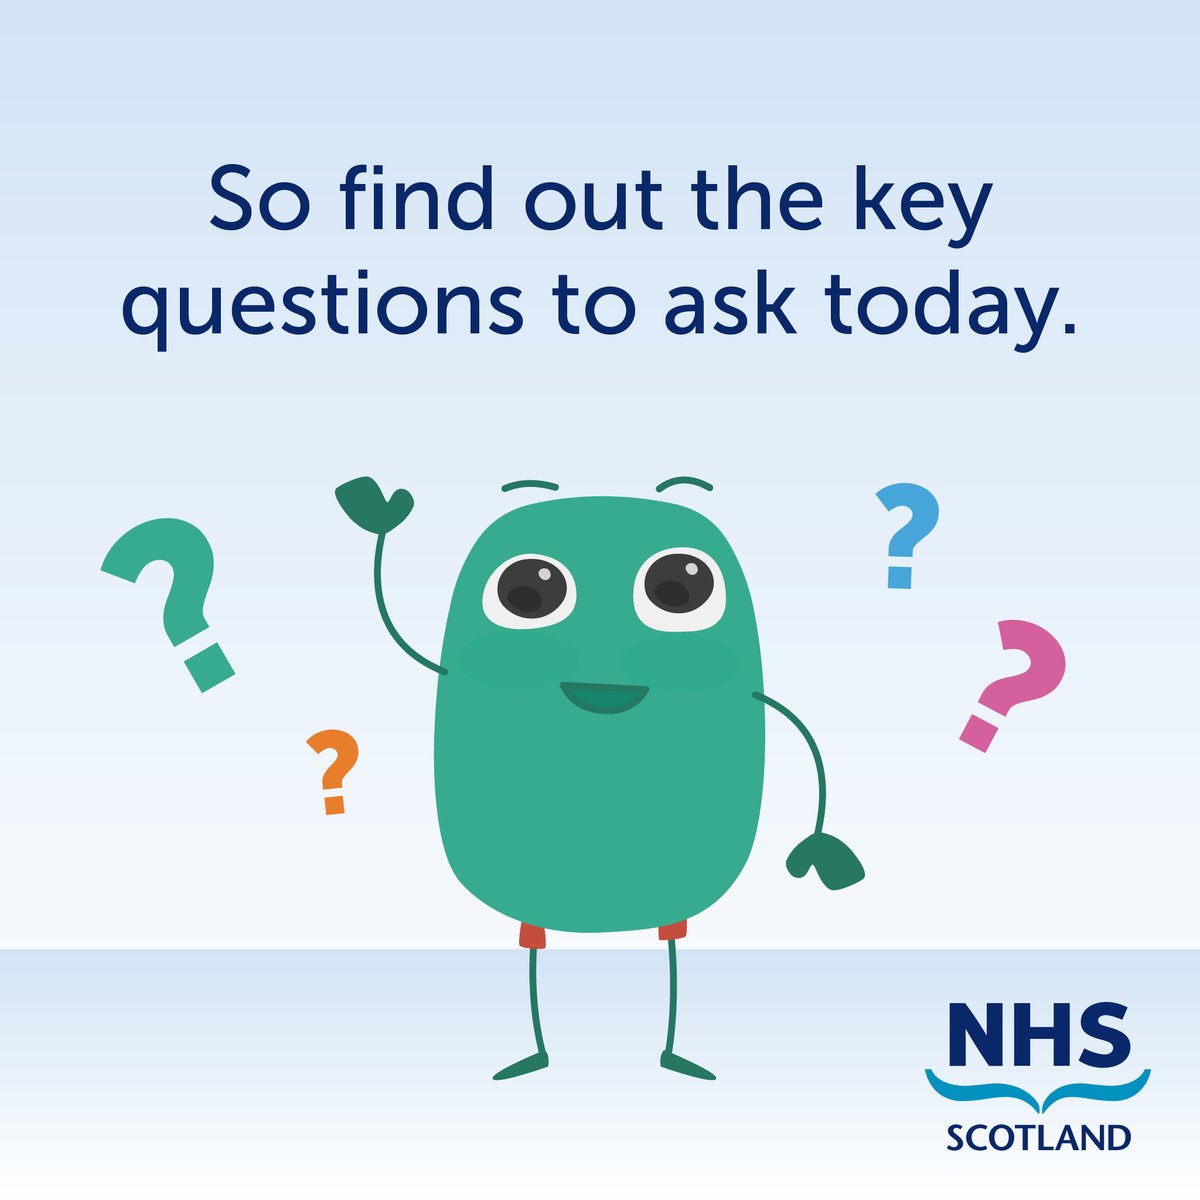 #ItsOKtoAsk! When you understand what's going on with your health, you can make better decisions around your care and treatment. For more info on questions to ask at your next appointment visit: nhsinform.scot/its-ok-to-ask